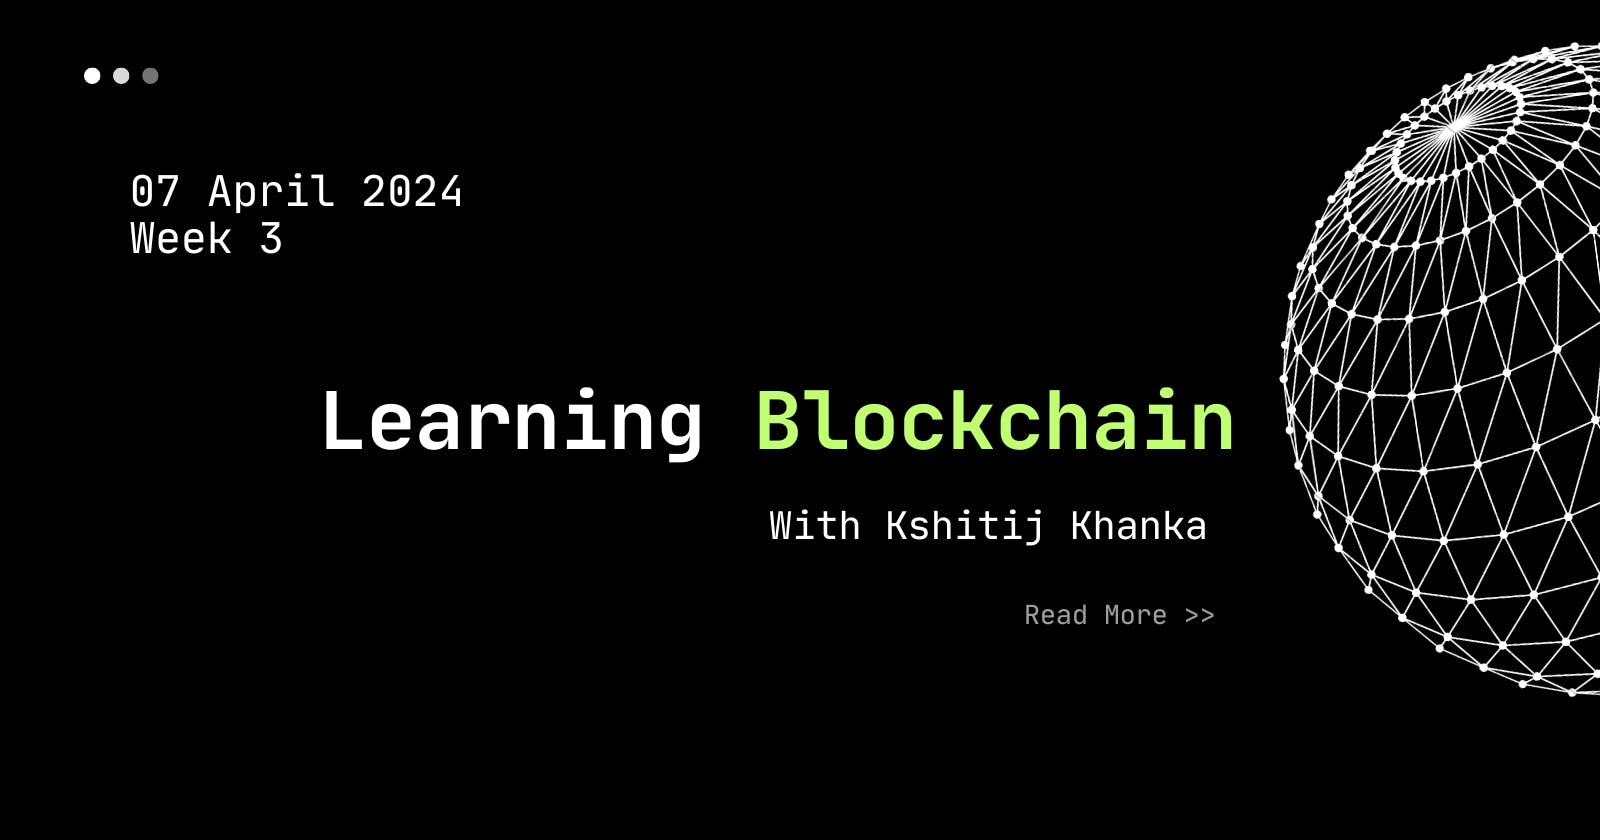 Deep Dive in to Blockchain — Week 3 of Learning .